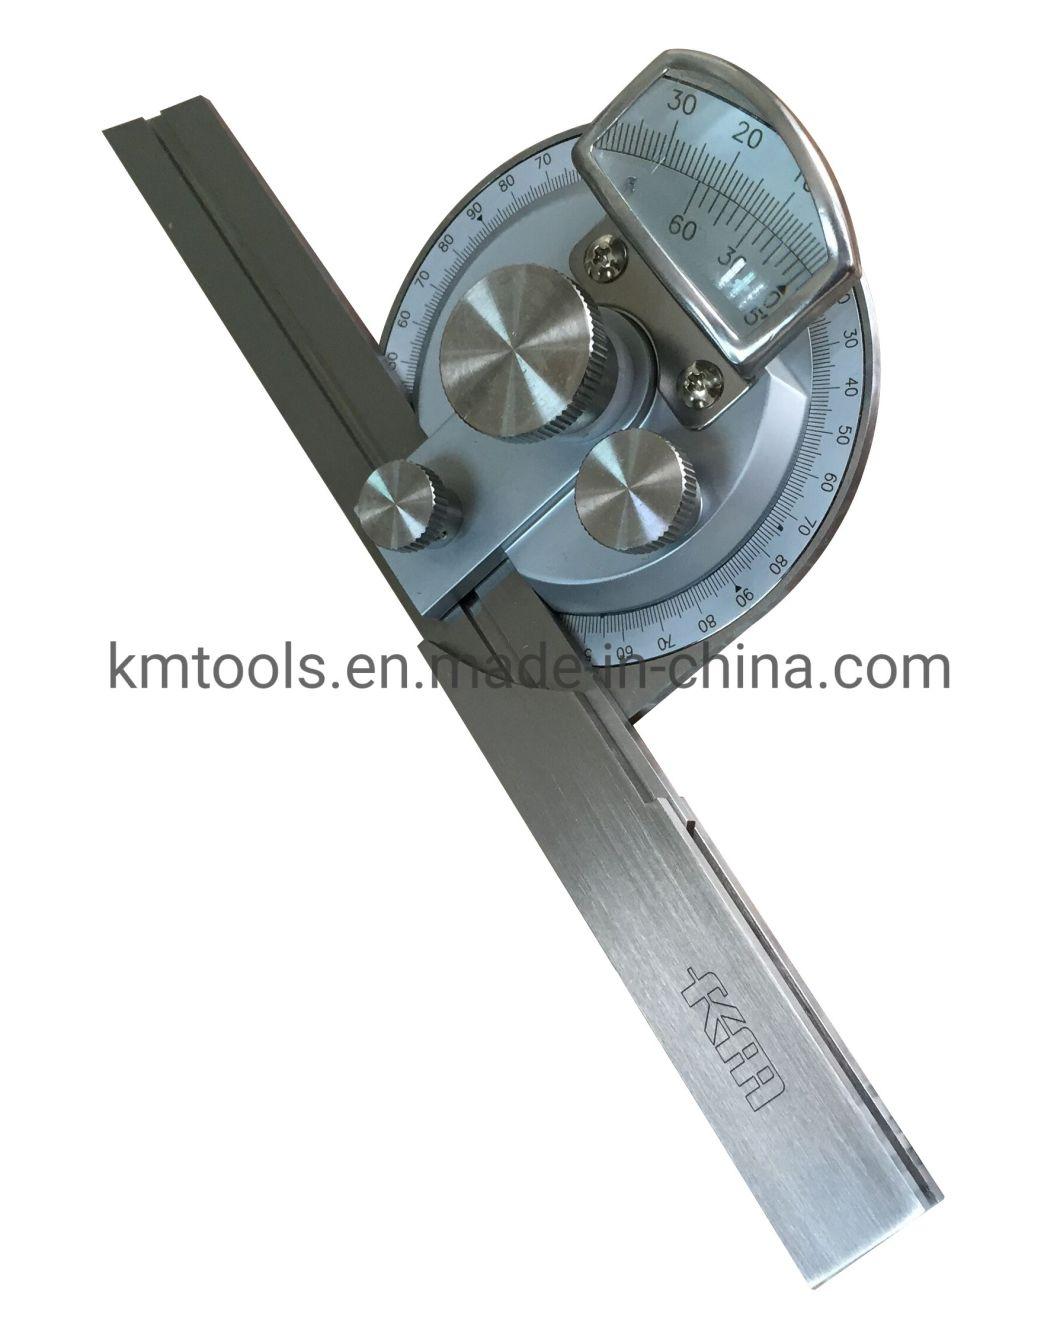 Stainless Steel Body 0-360 Degree Vernier Protractor with Magnifier Measuring Tool